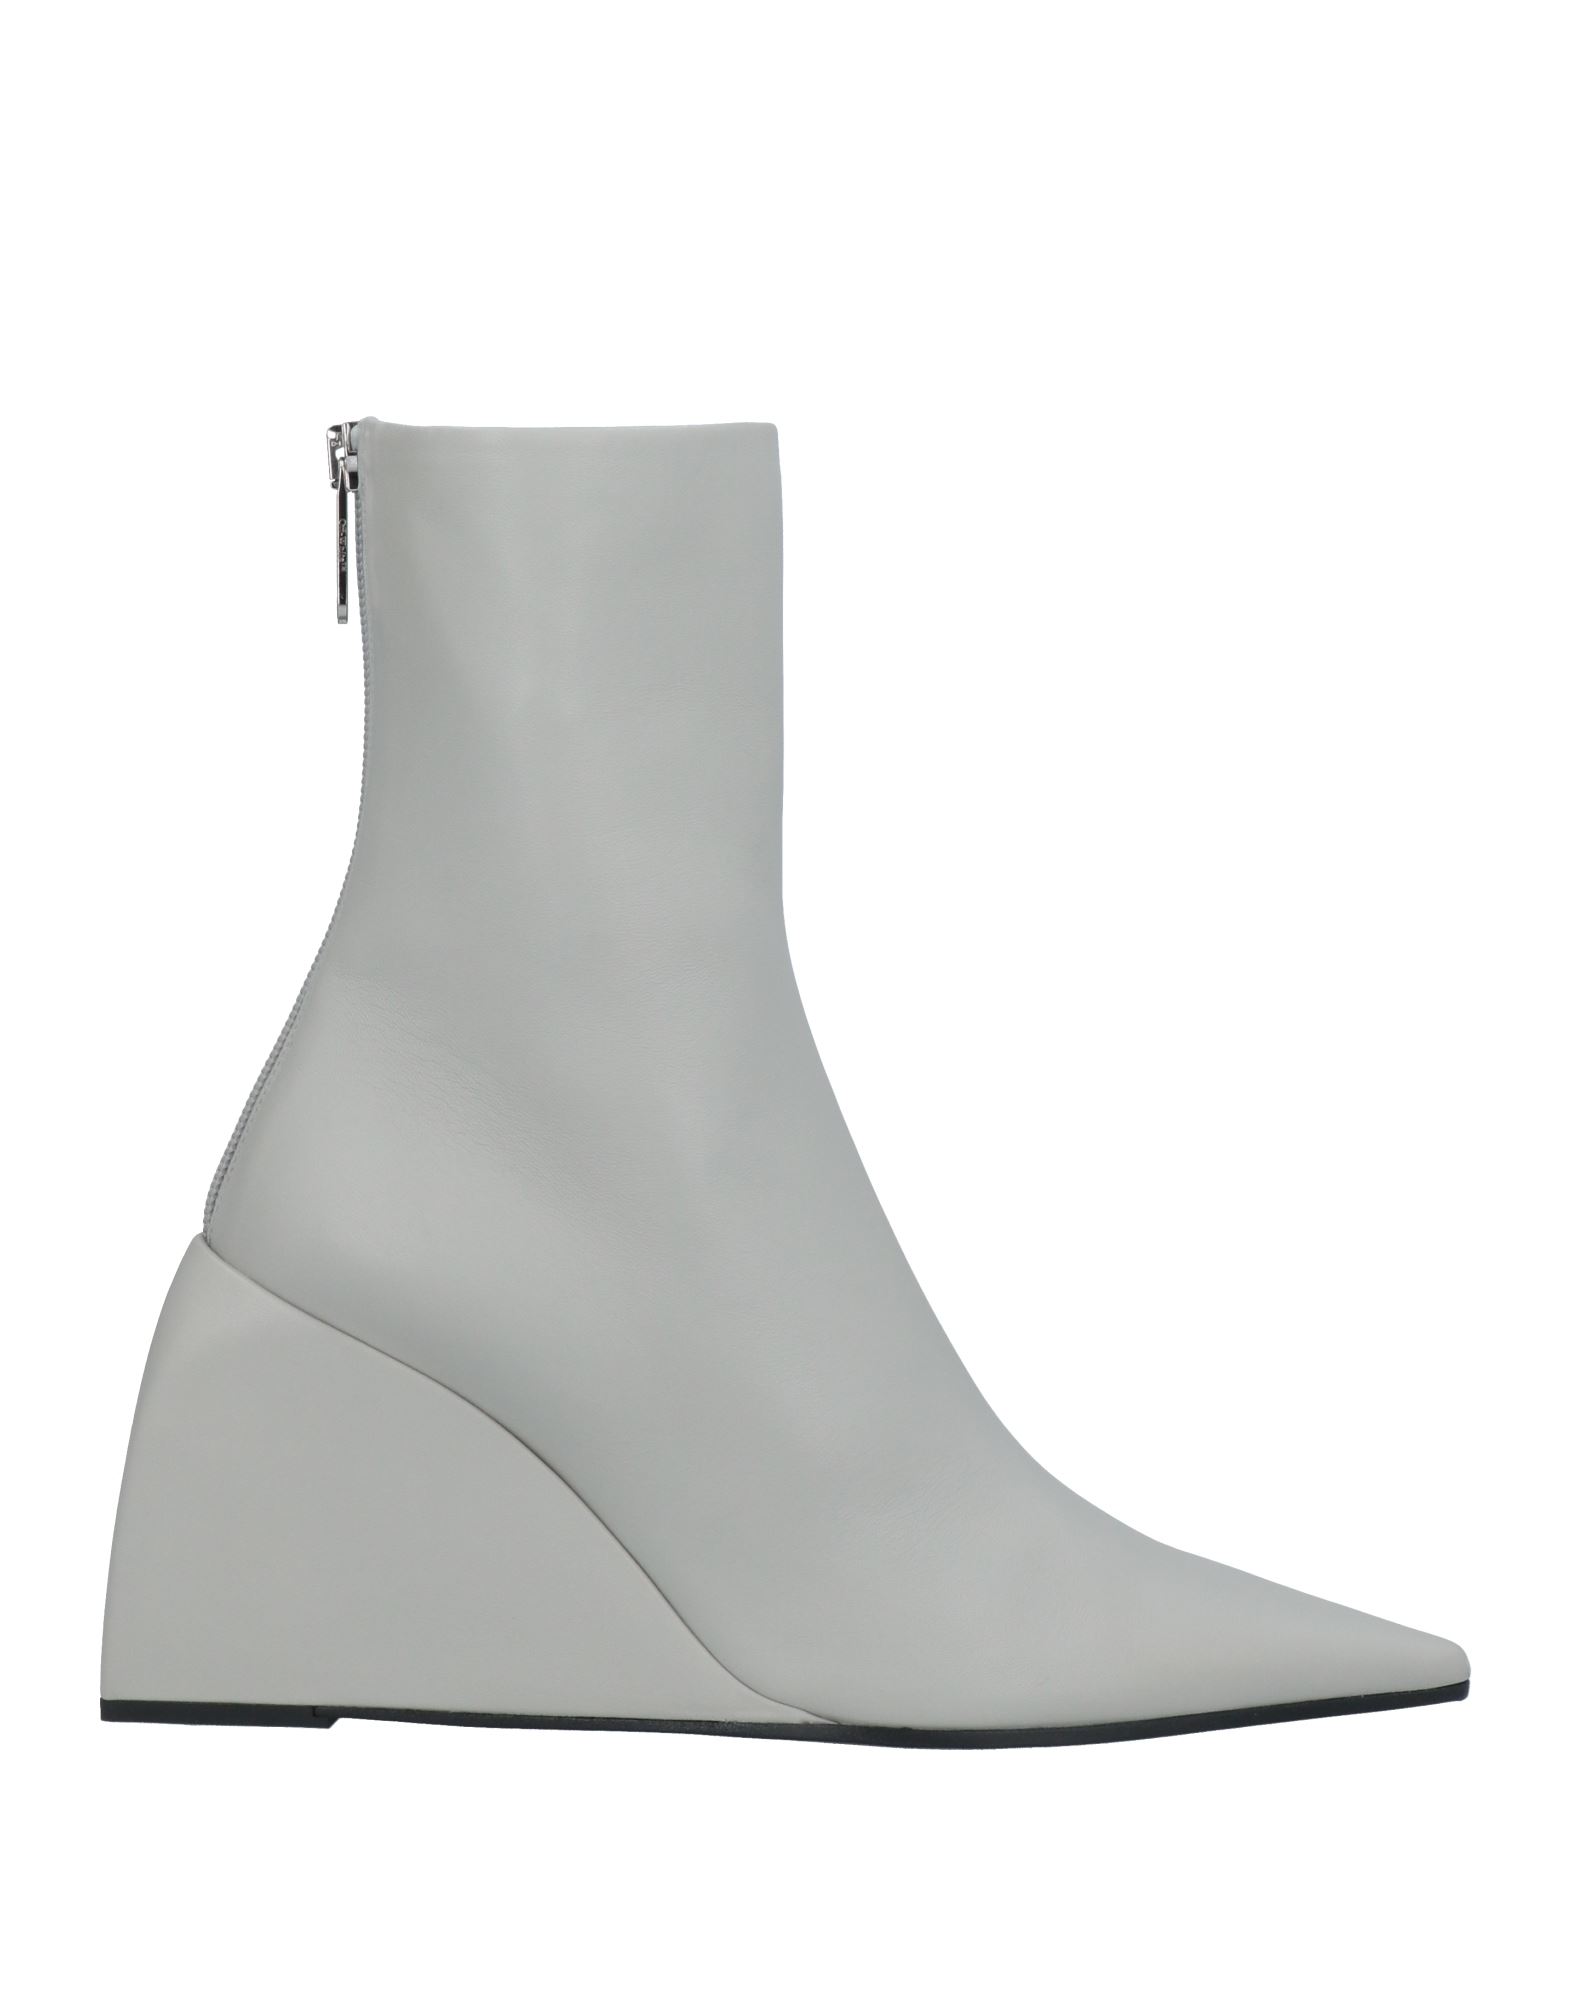 Off-white Woman Ankle Boots Light Grey Size 6 Soft Leather